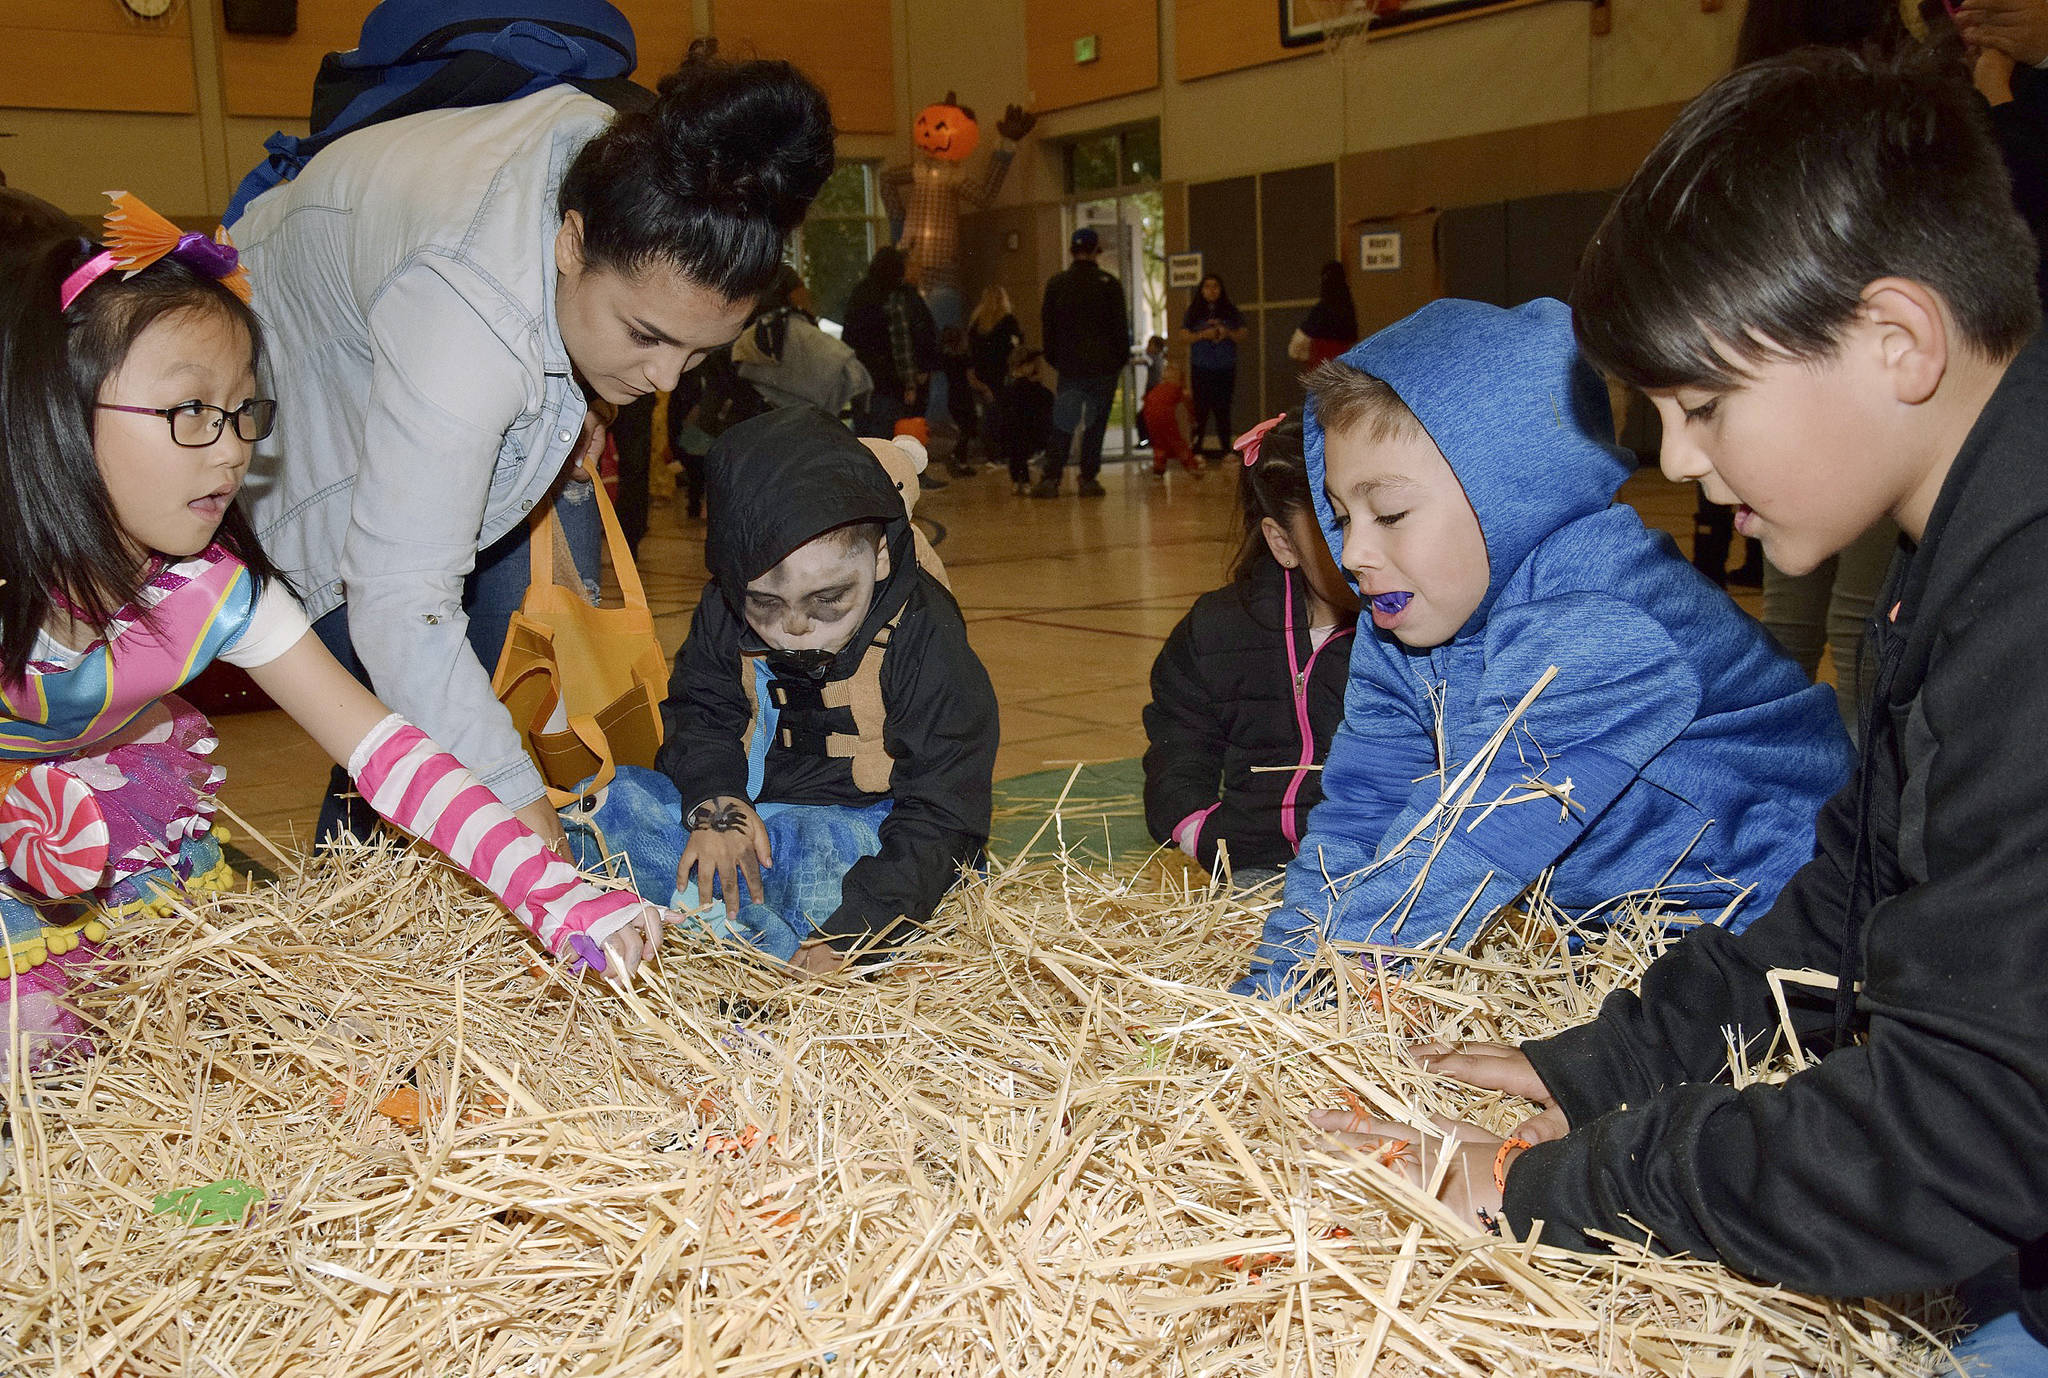 Kids hunt for sweets in the Candy In The Hay game. RACHEL CIAMPI, Auburn Reporter